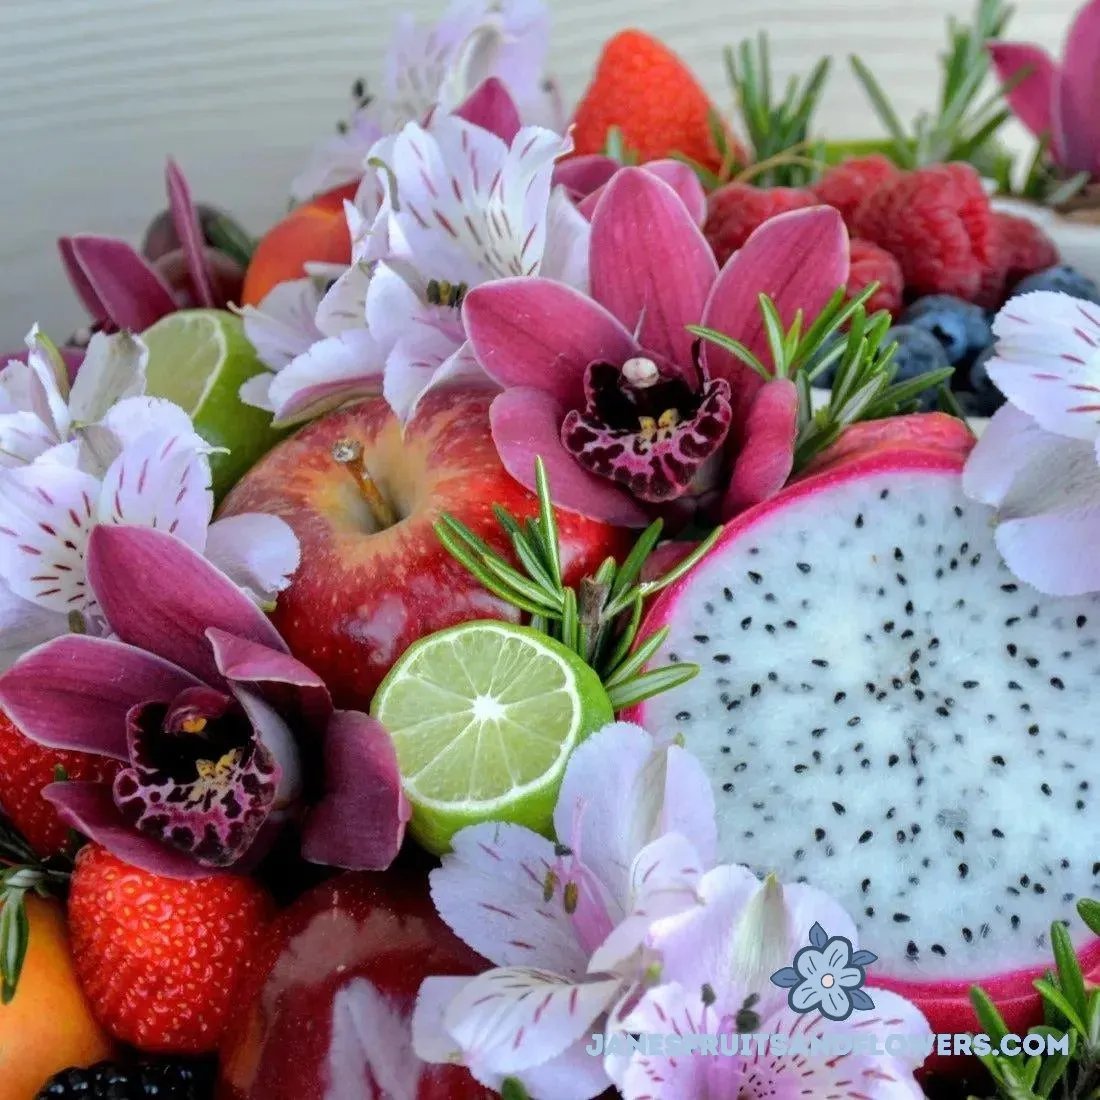 Wild Orchid Bouquet - Jane's Fruits And Flowers